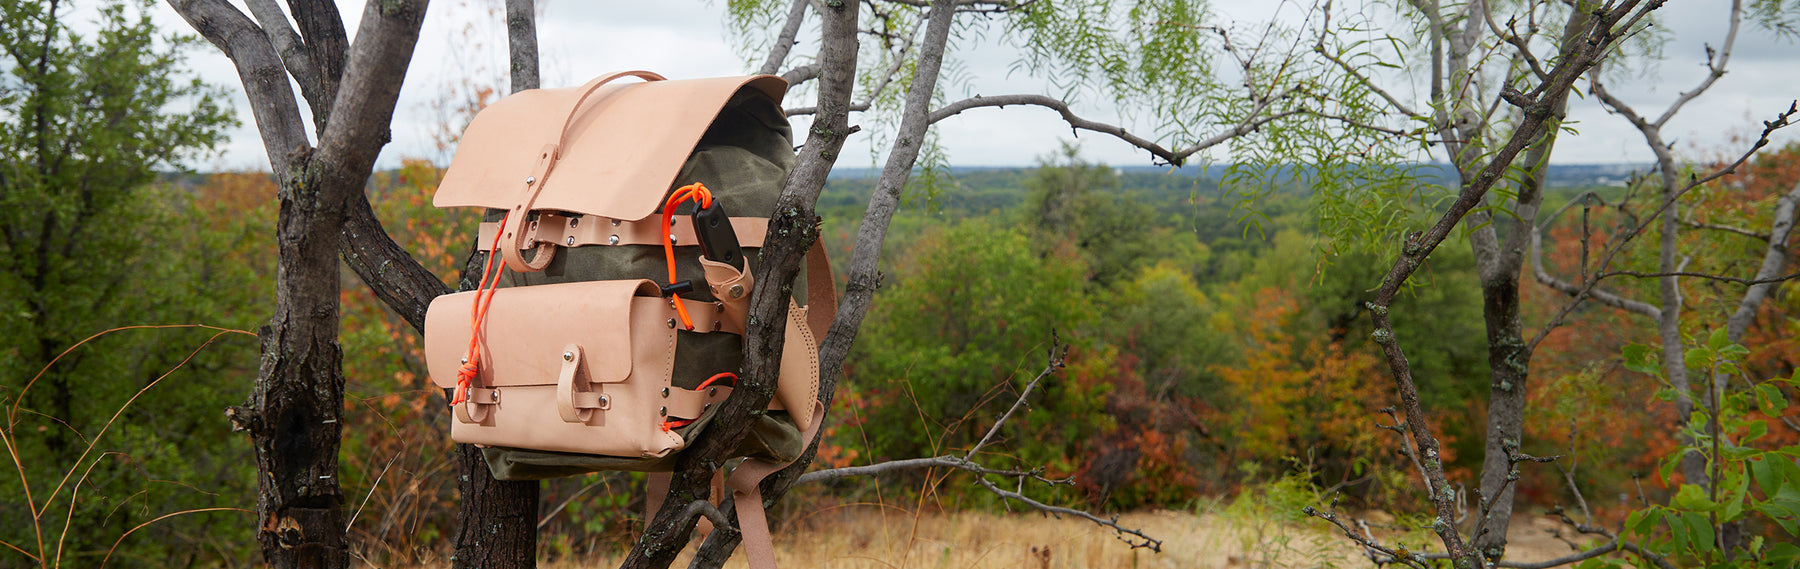 Wilderness Wonders: Stay Outdoor Ready with our New Explorer Kits!